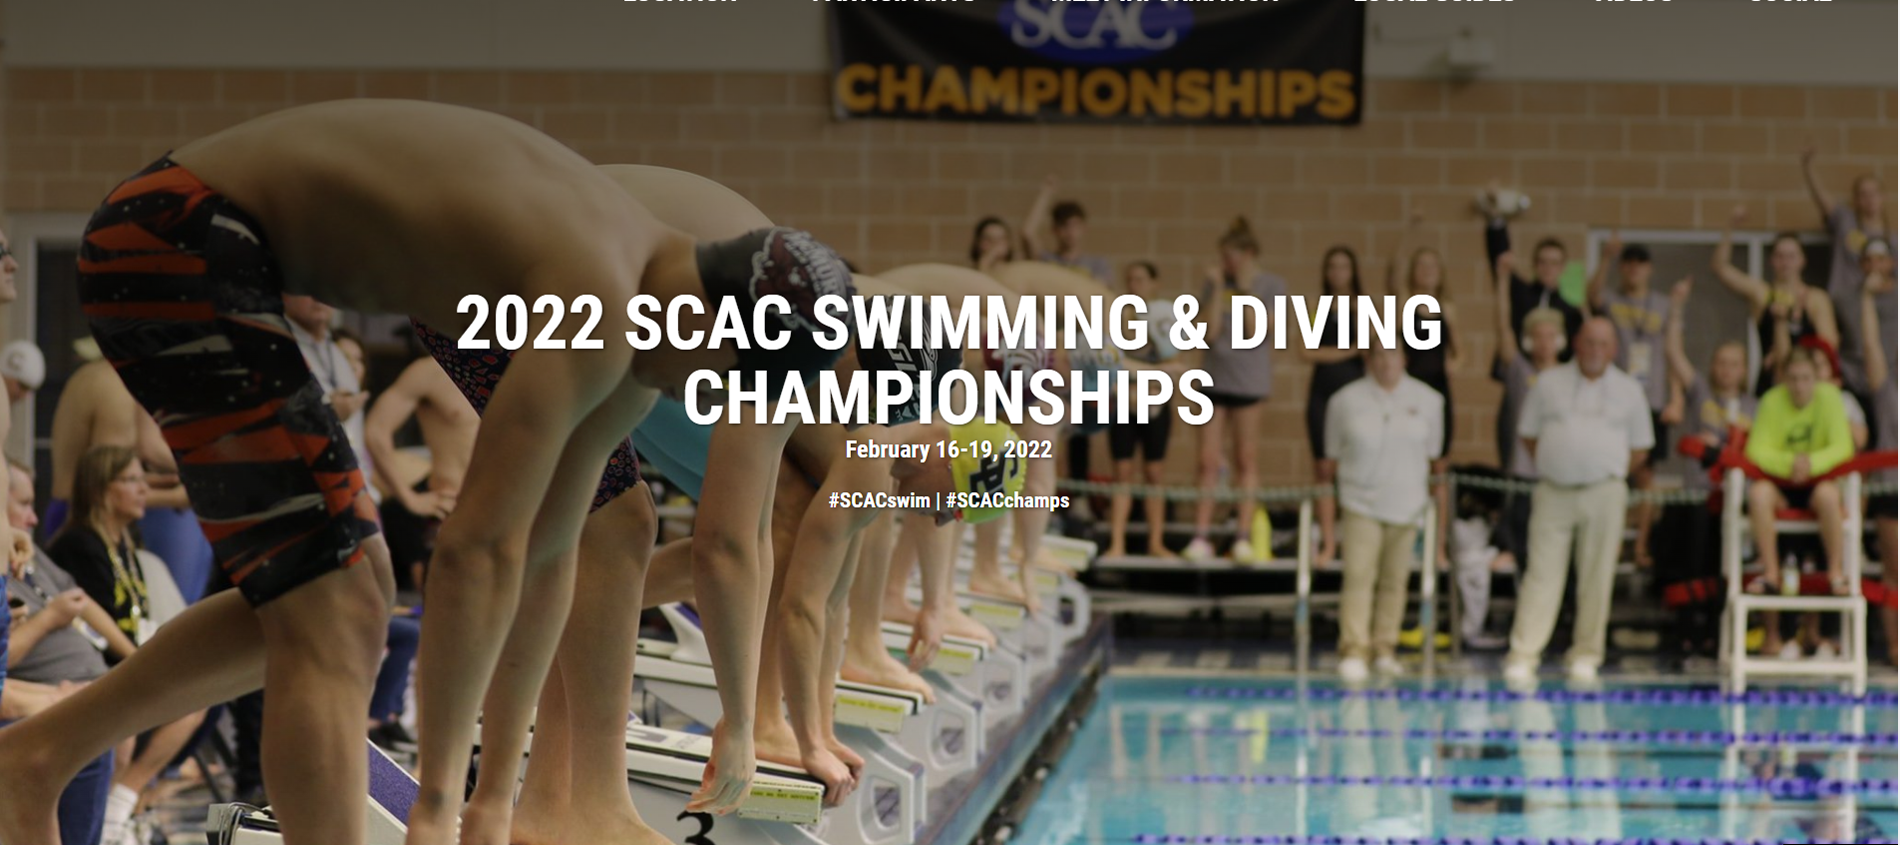 SCAC Swimming & Diving Championship Tickets On Sale